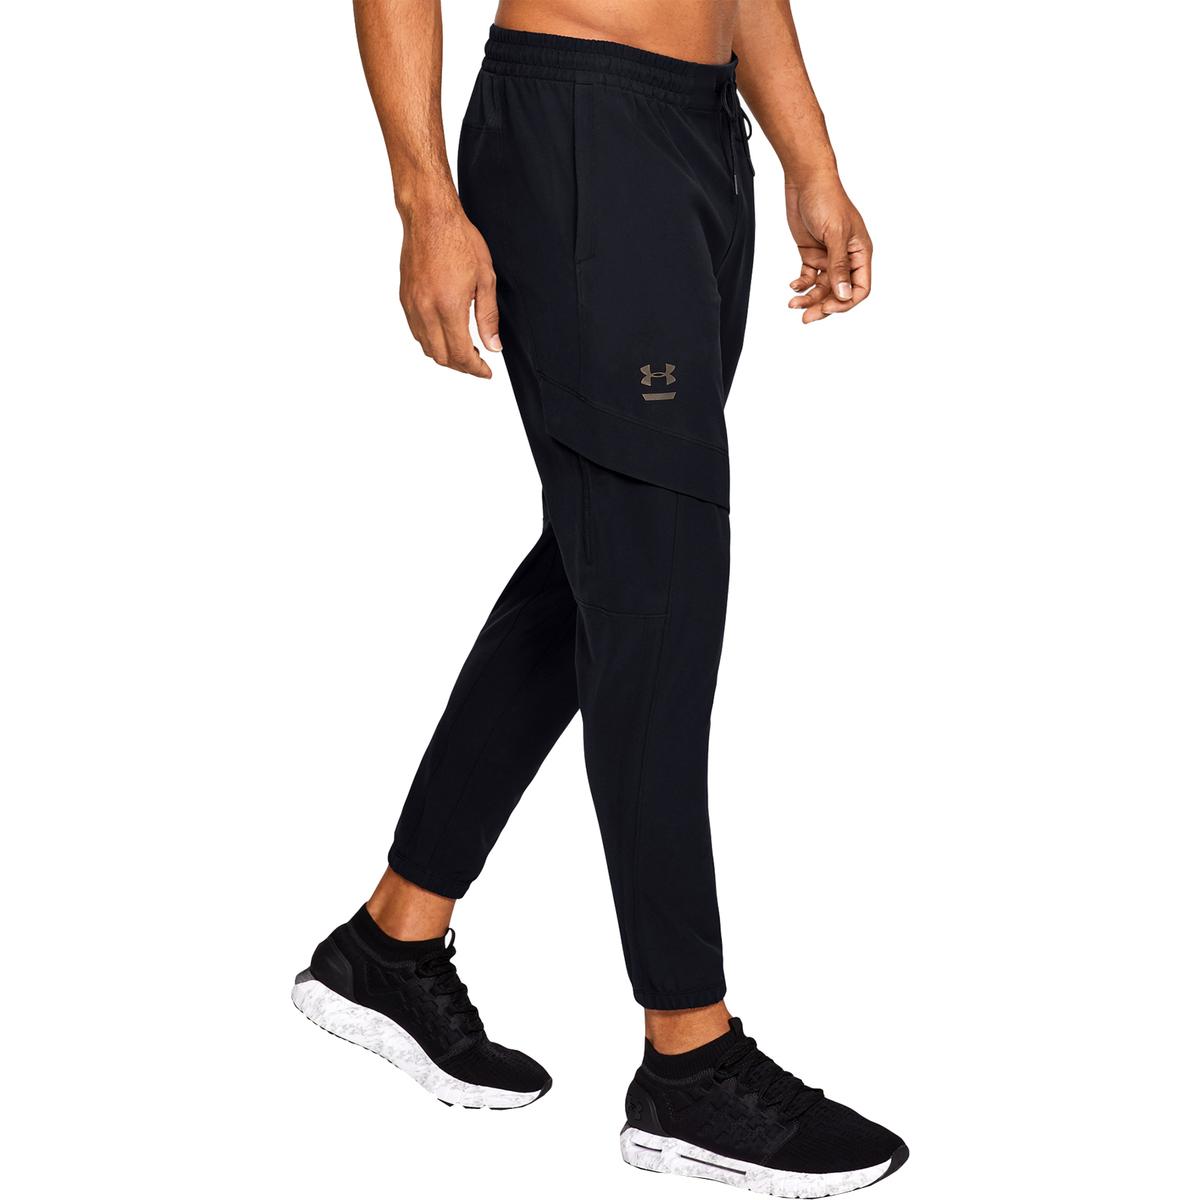 Under Armour Mens Black Fitted Work-Out Gym-Wear Cargo Pants XL BHFO ...